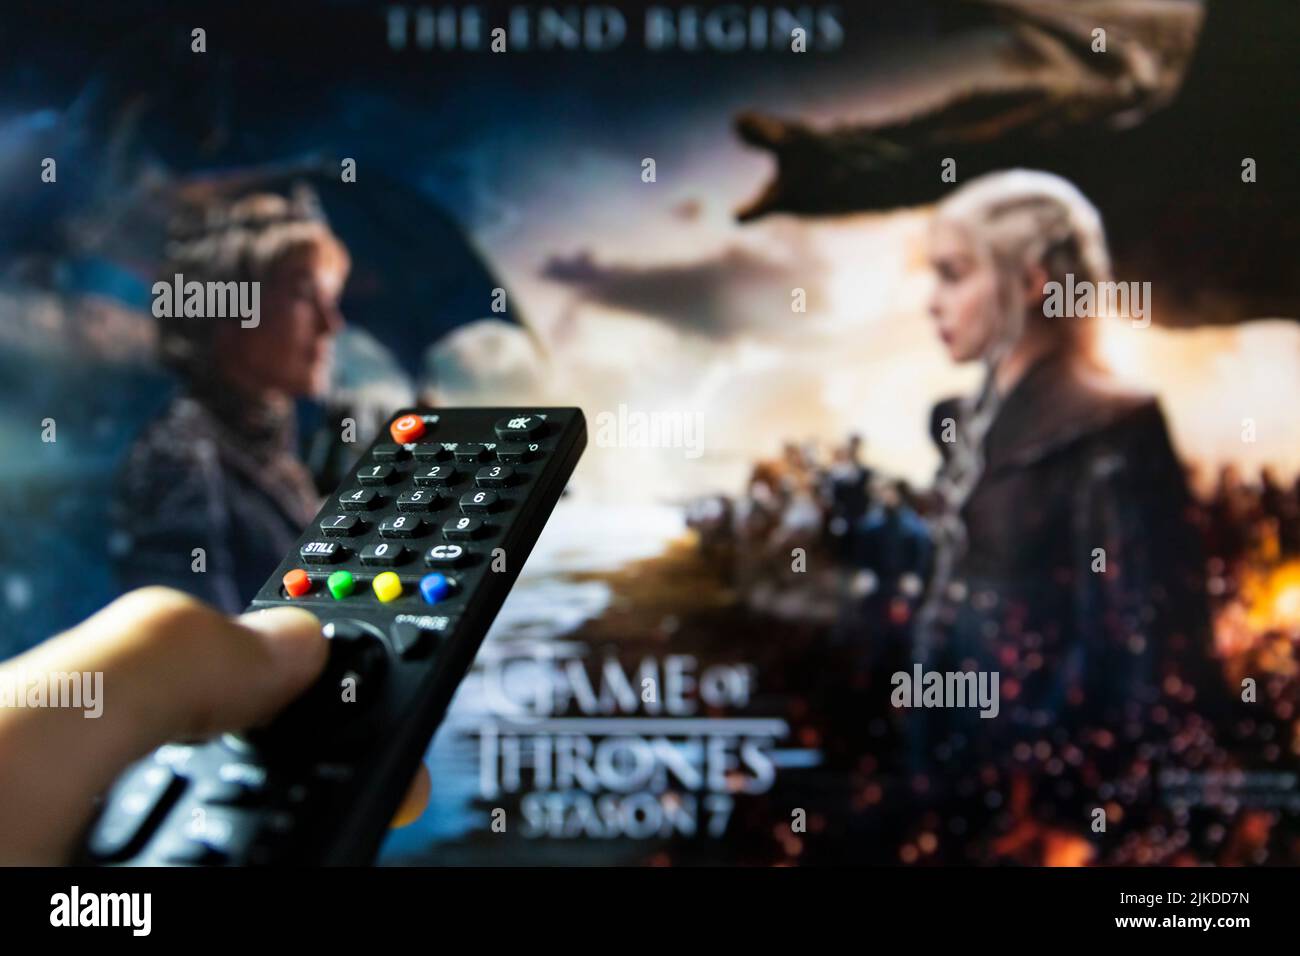 Belgrade, Serbia - July 22, 2022: Game of Thrones HBO TV series on TV with remote control in hand. Focuse on the remote. Nine noble families fight Stock Photo